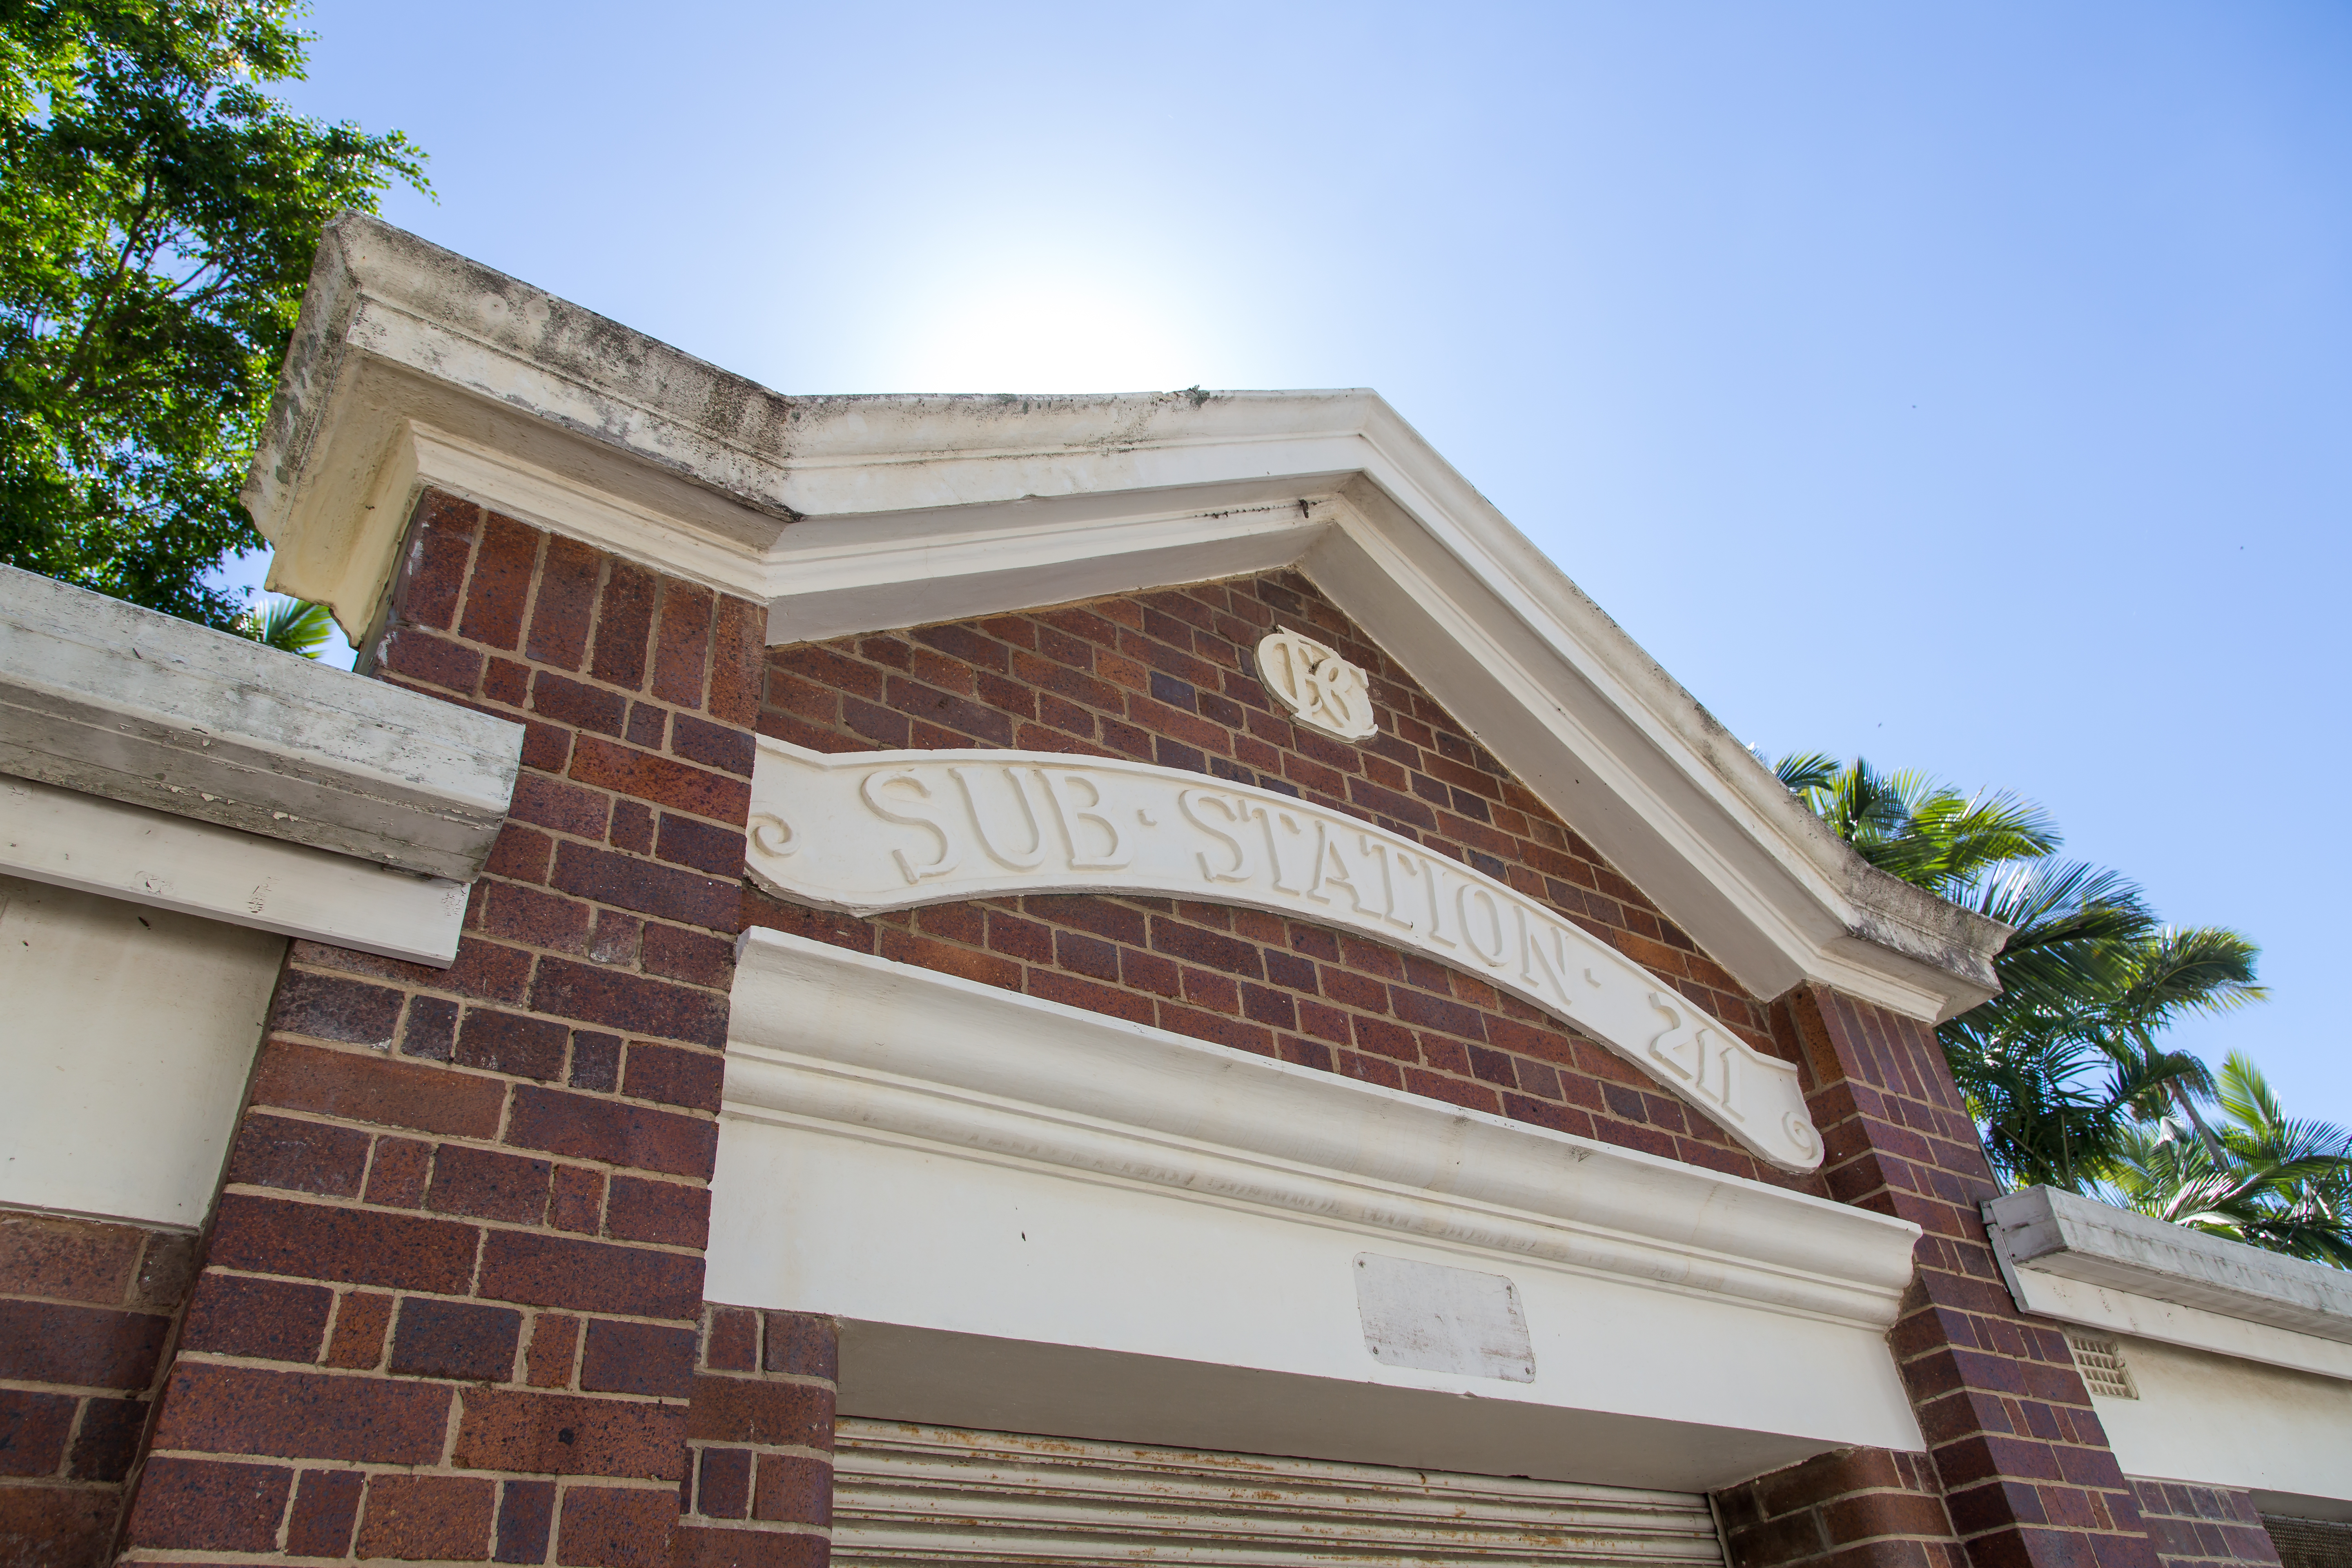 This is an image of the heritage place known as Cairns Street Substation 211